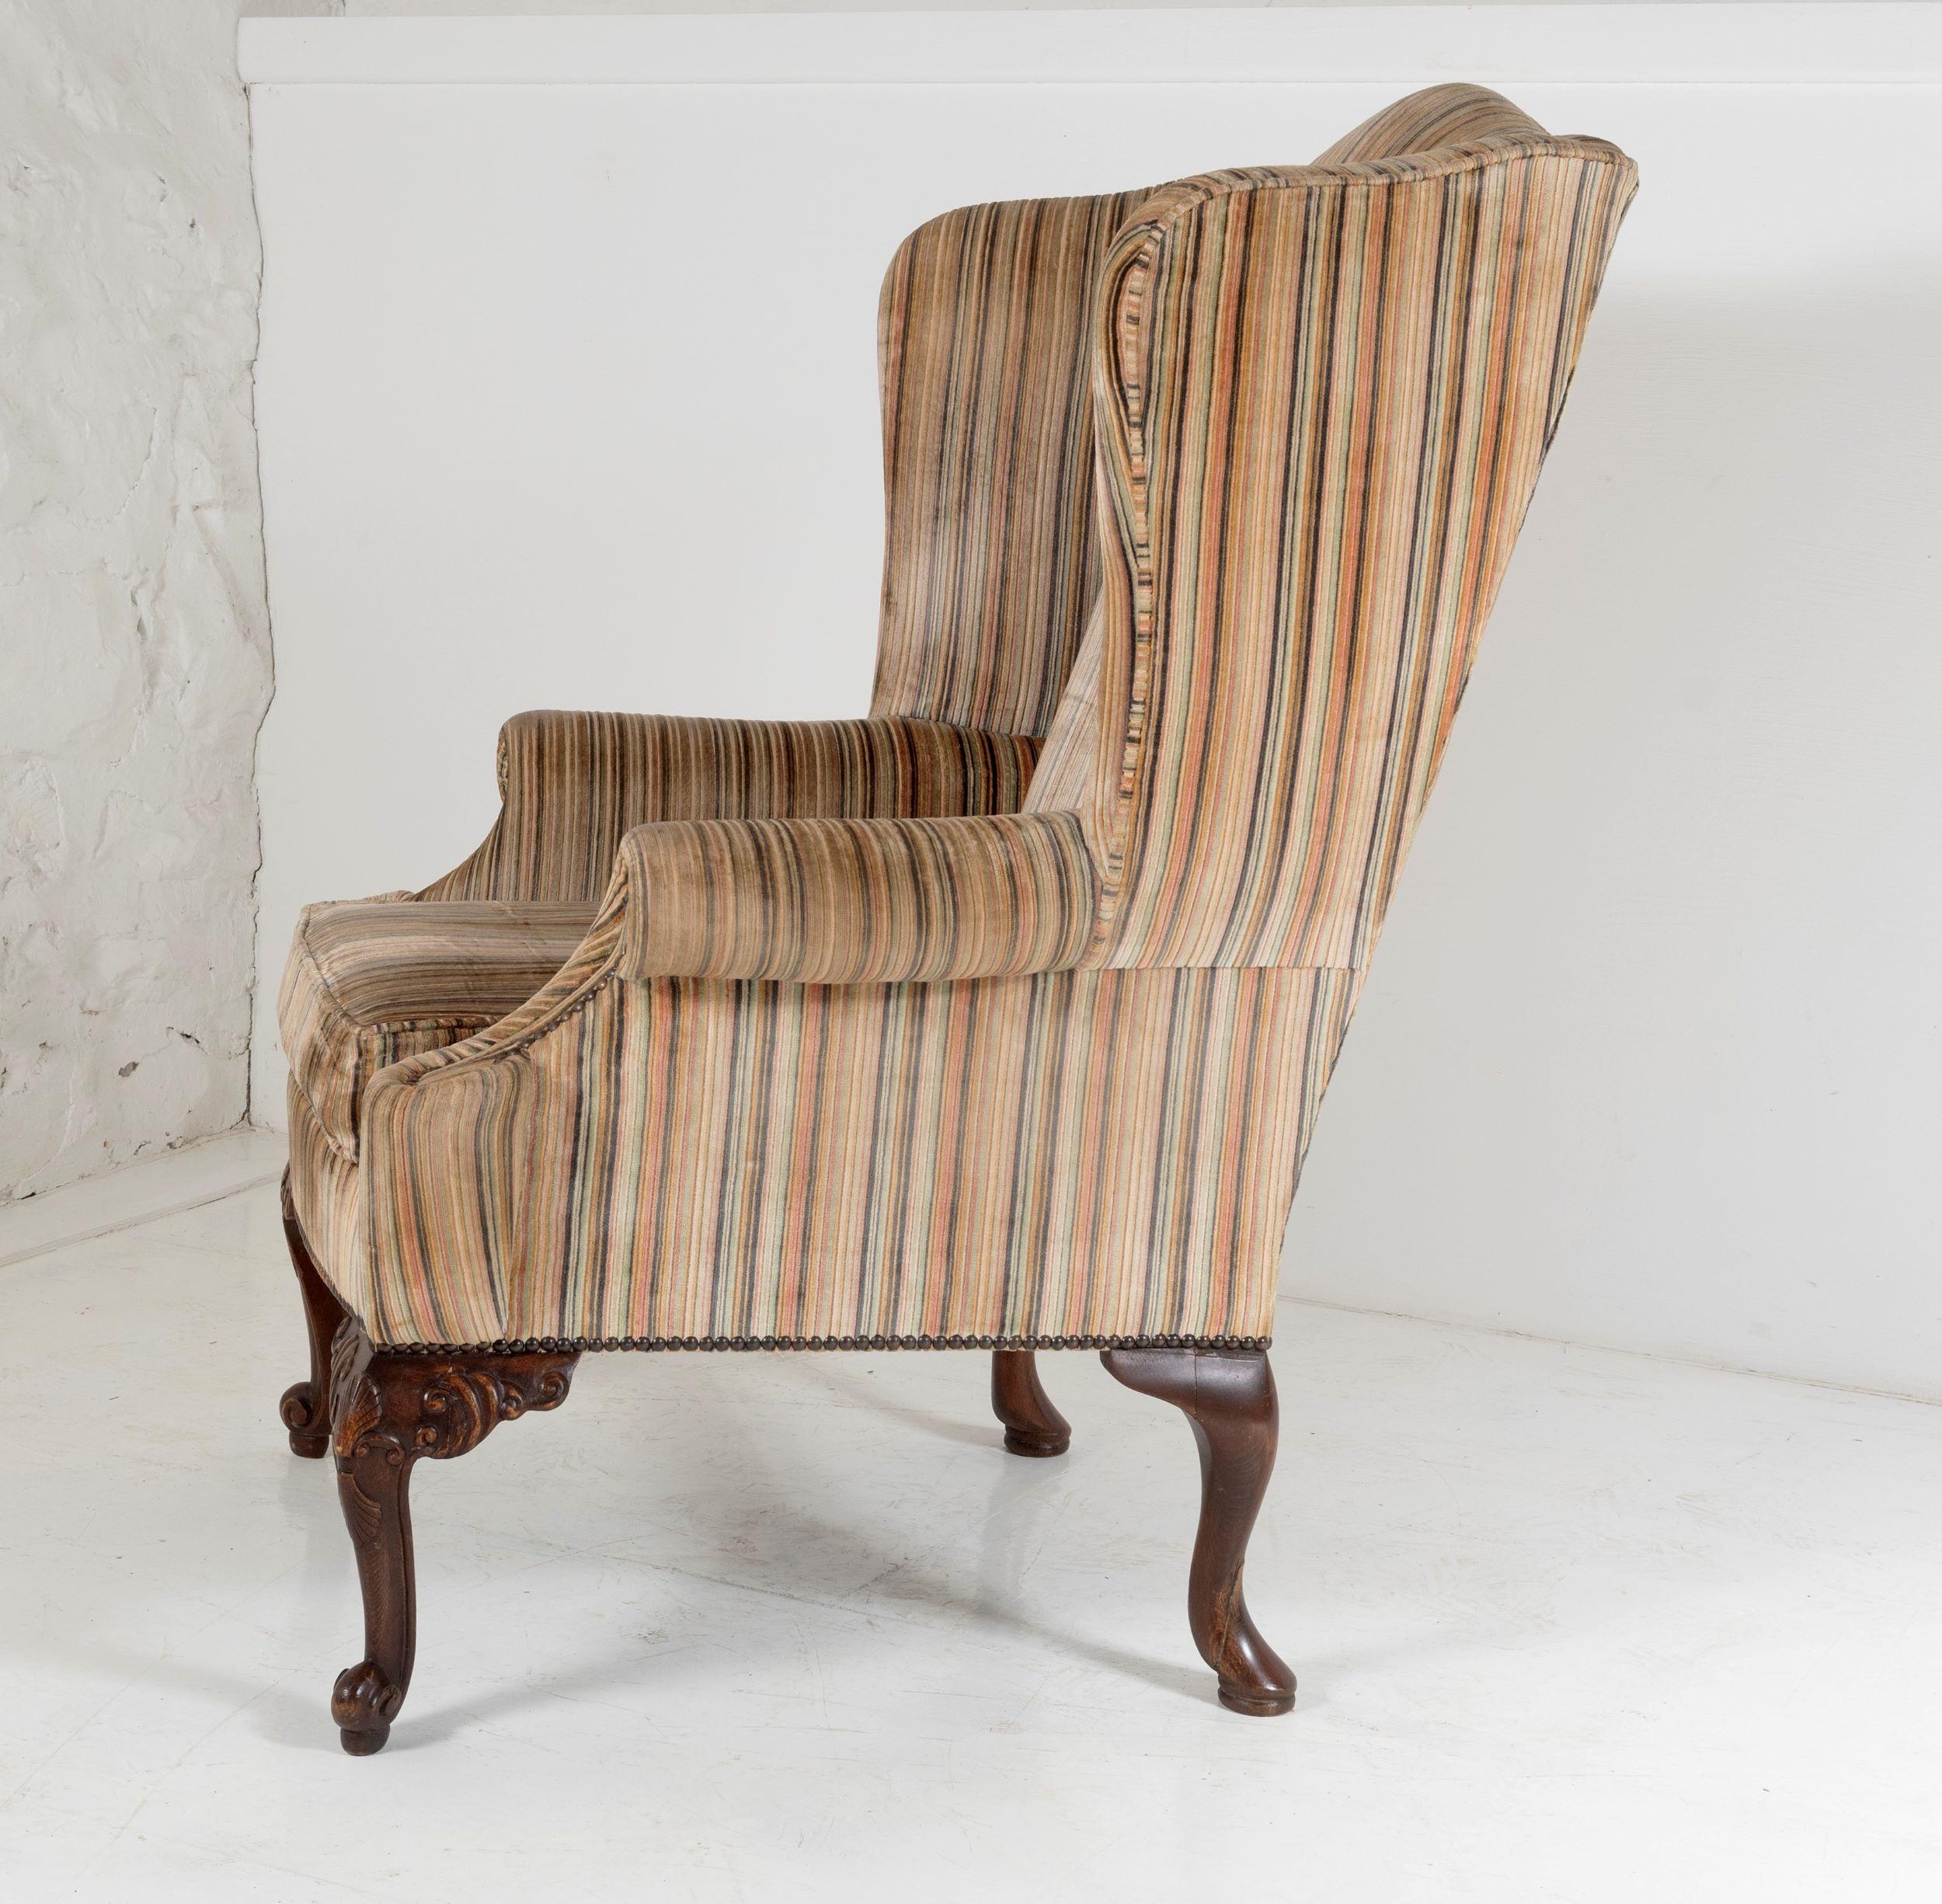 British Stylish George III Style Wing Back Armchair in Original Striped Upholstery For Sale